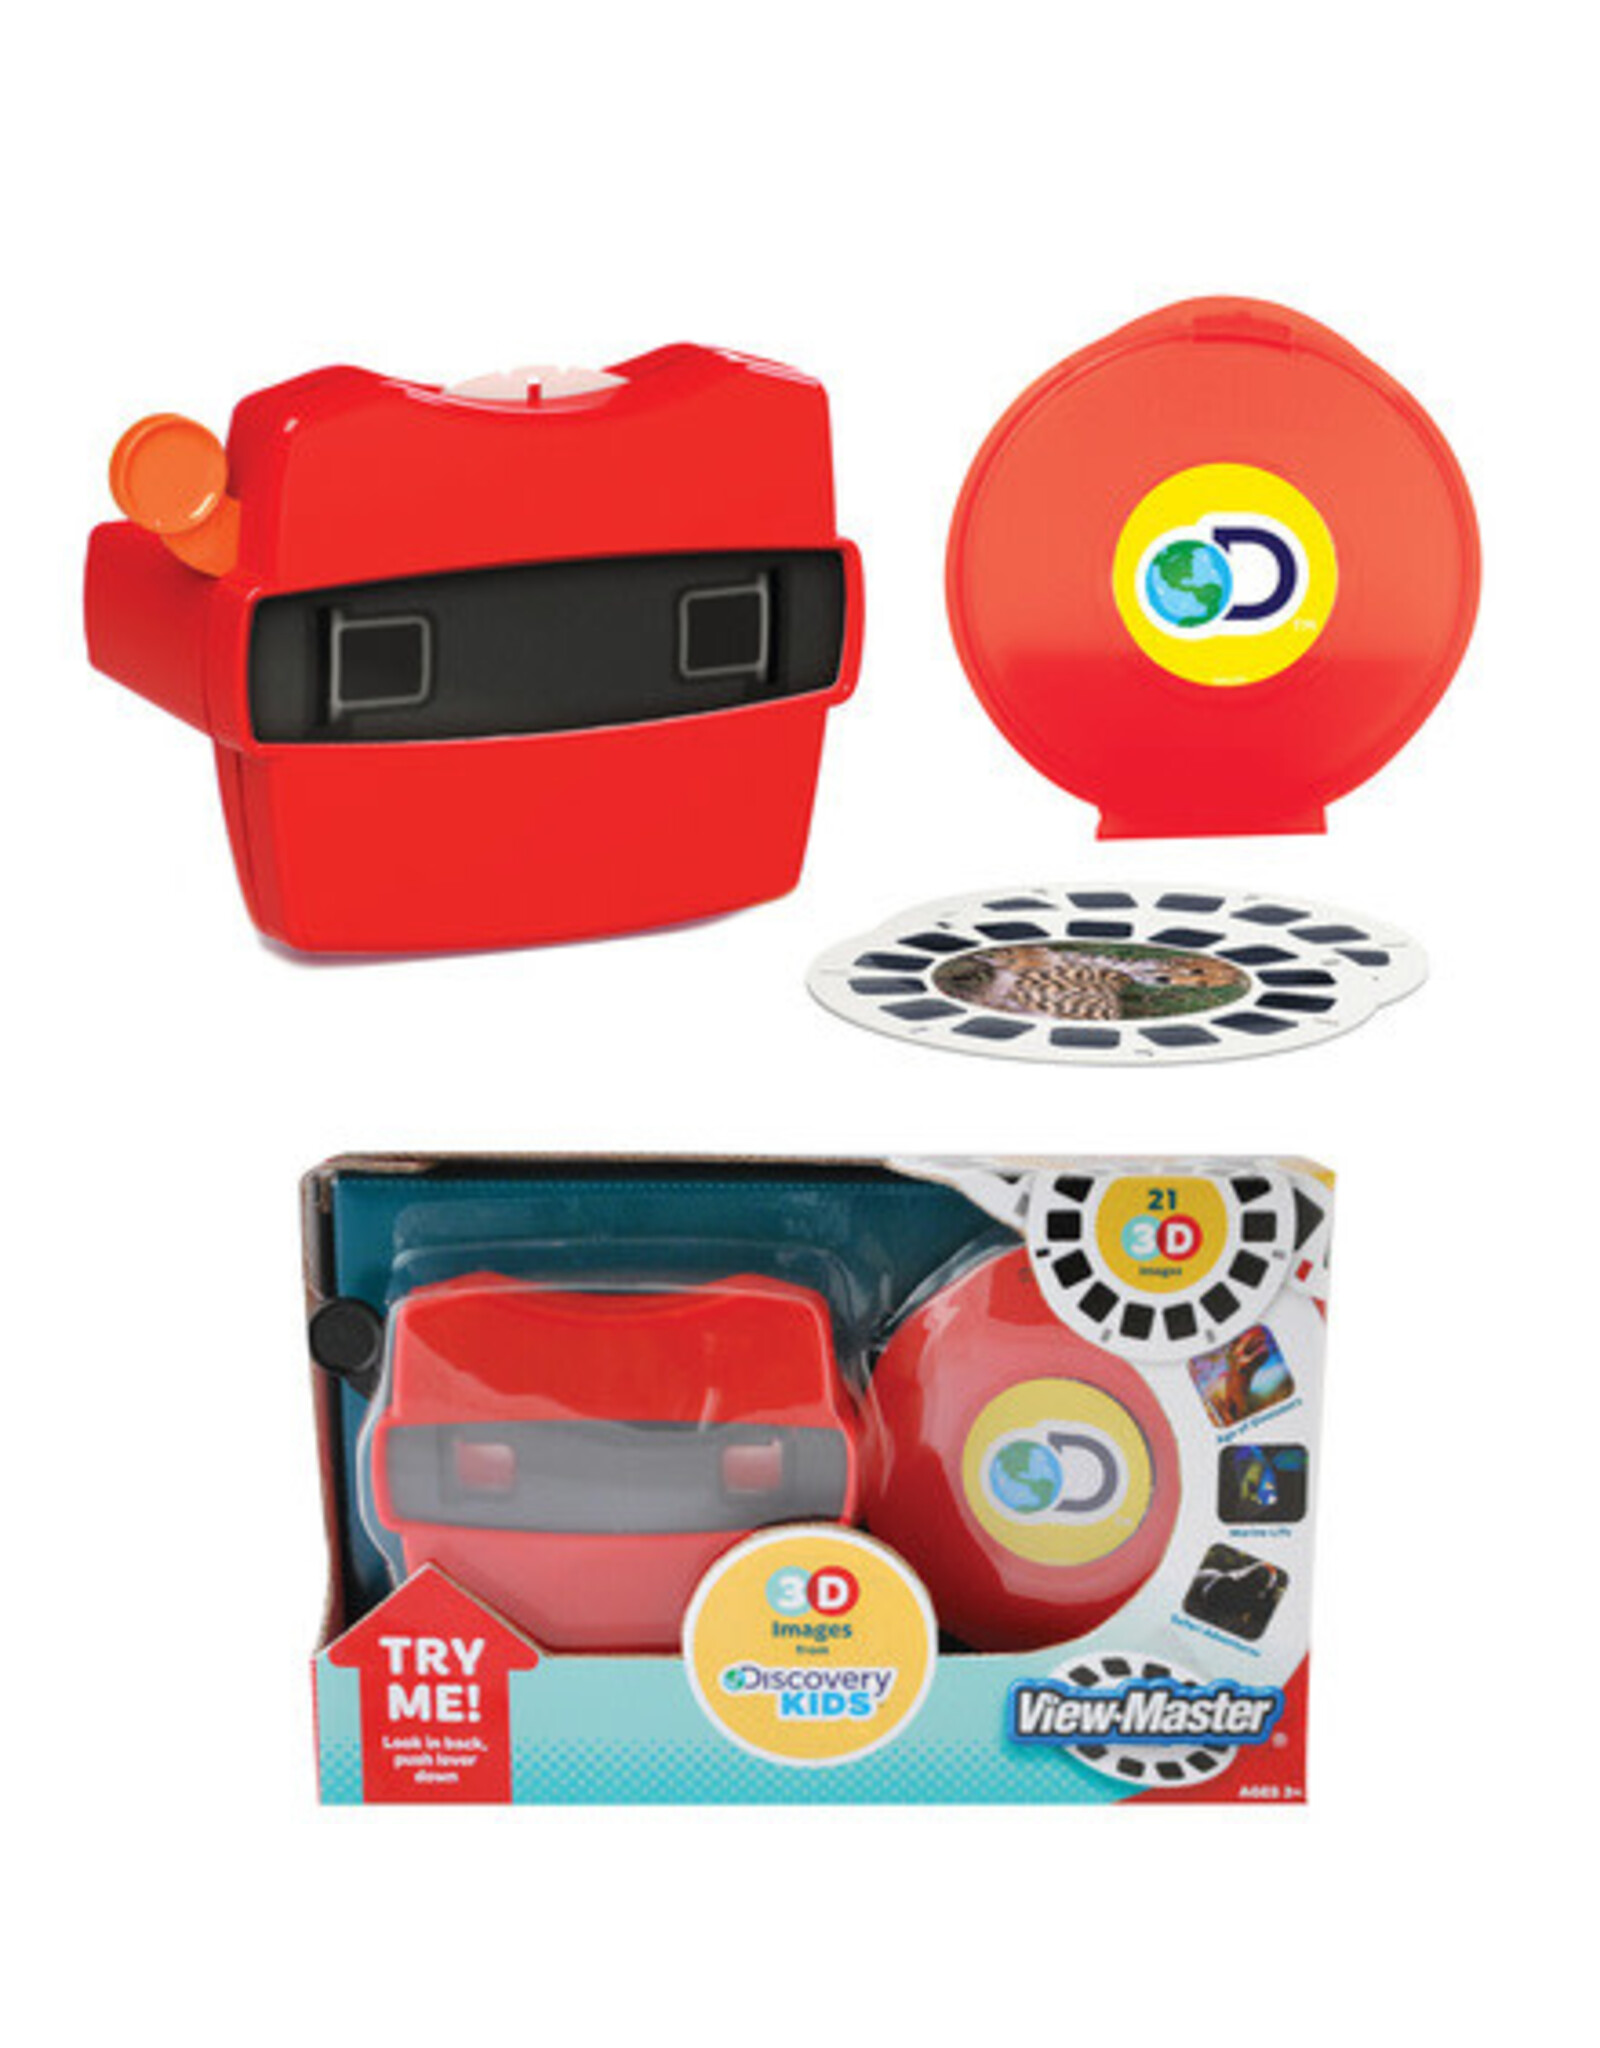 Viewmaster Boxed Set - Lets Play: Games & Toys